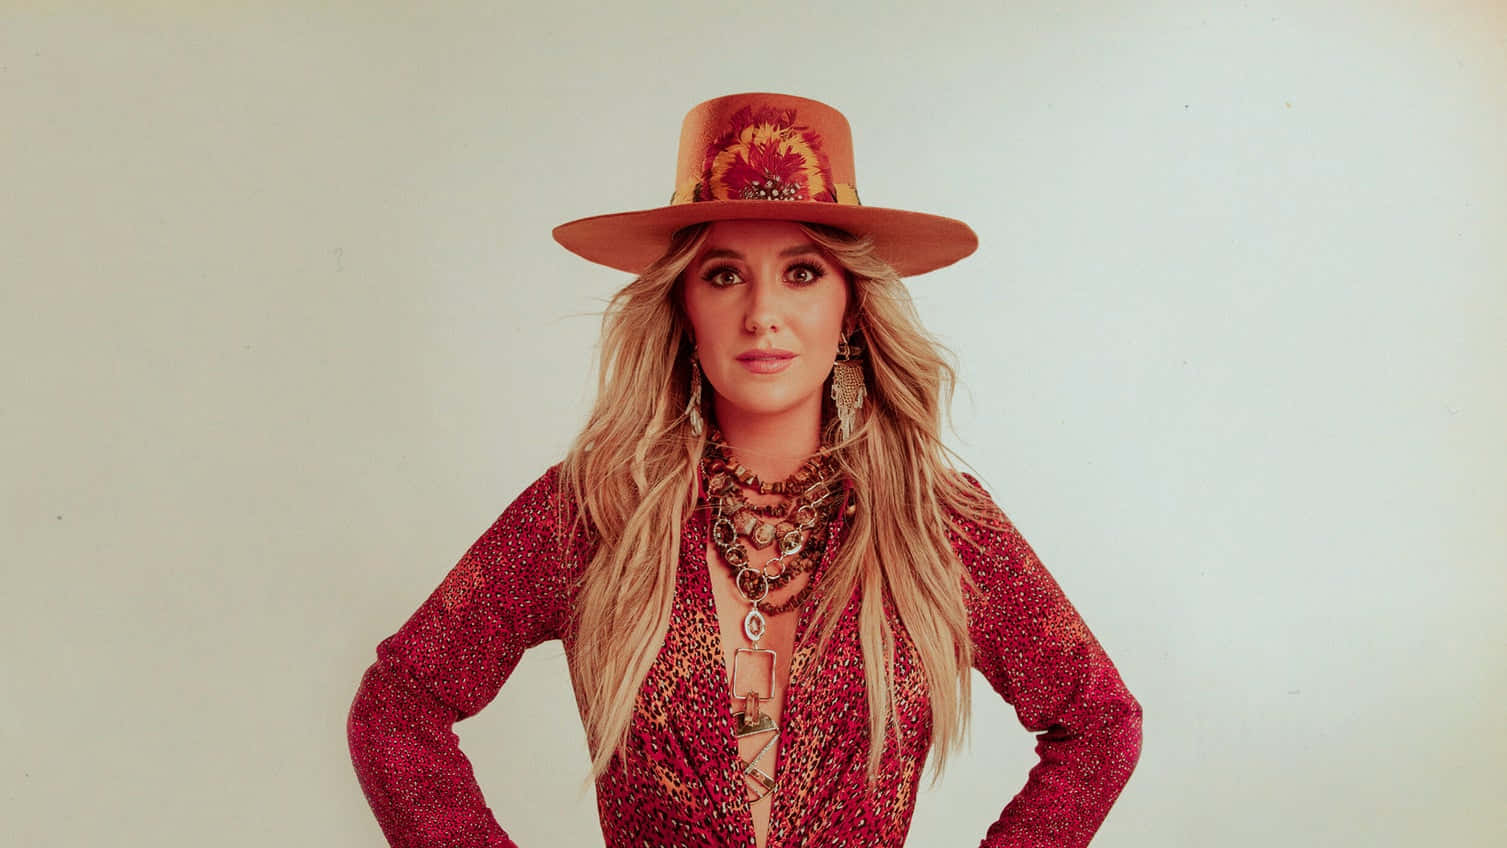 Country Music Artistin Red Glitter Jacketand Brown Hat Wallpaper